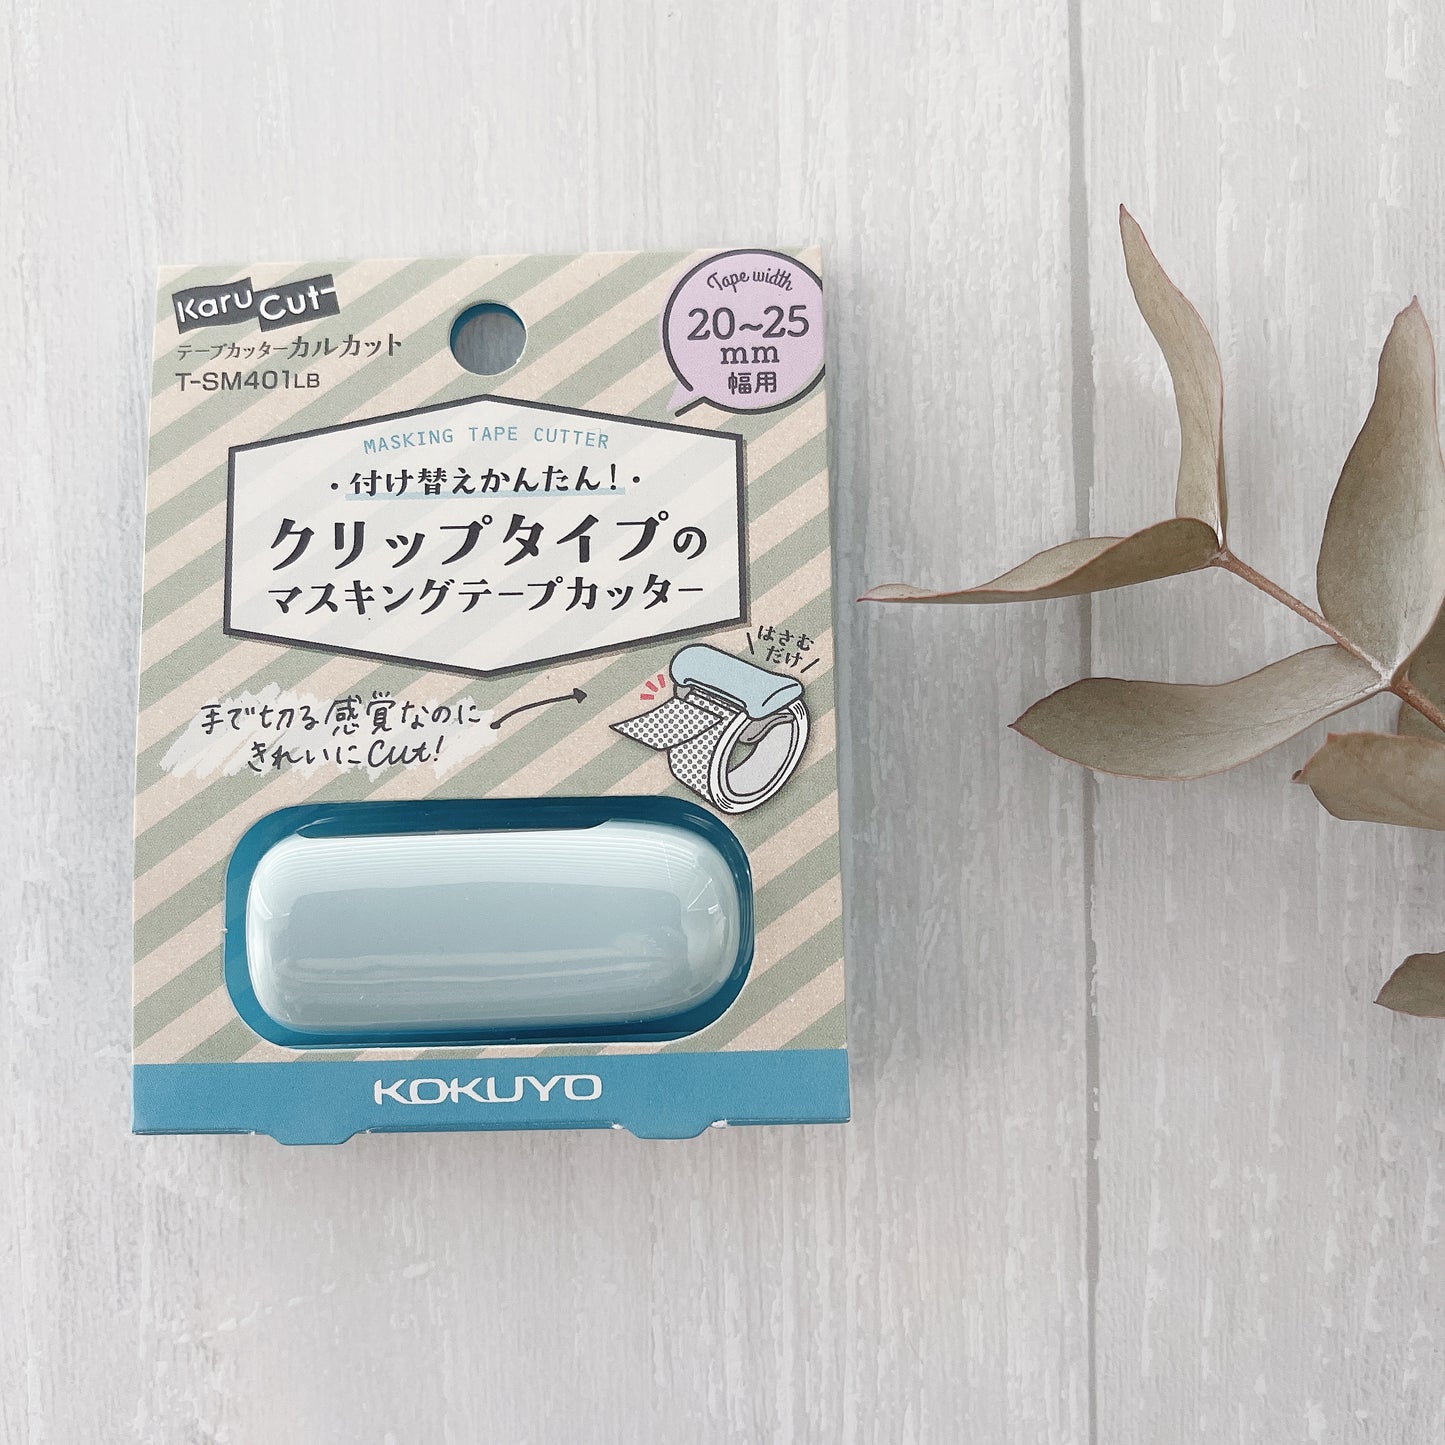 Kokuyo Clip & Cut Washi Tape Cutter (For tapes 20 to 25 mm in width)